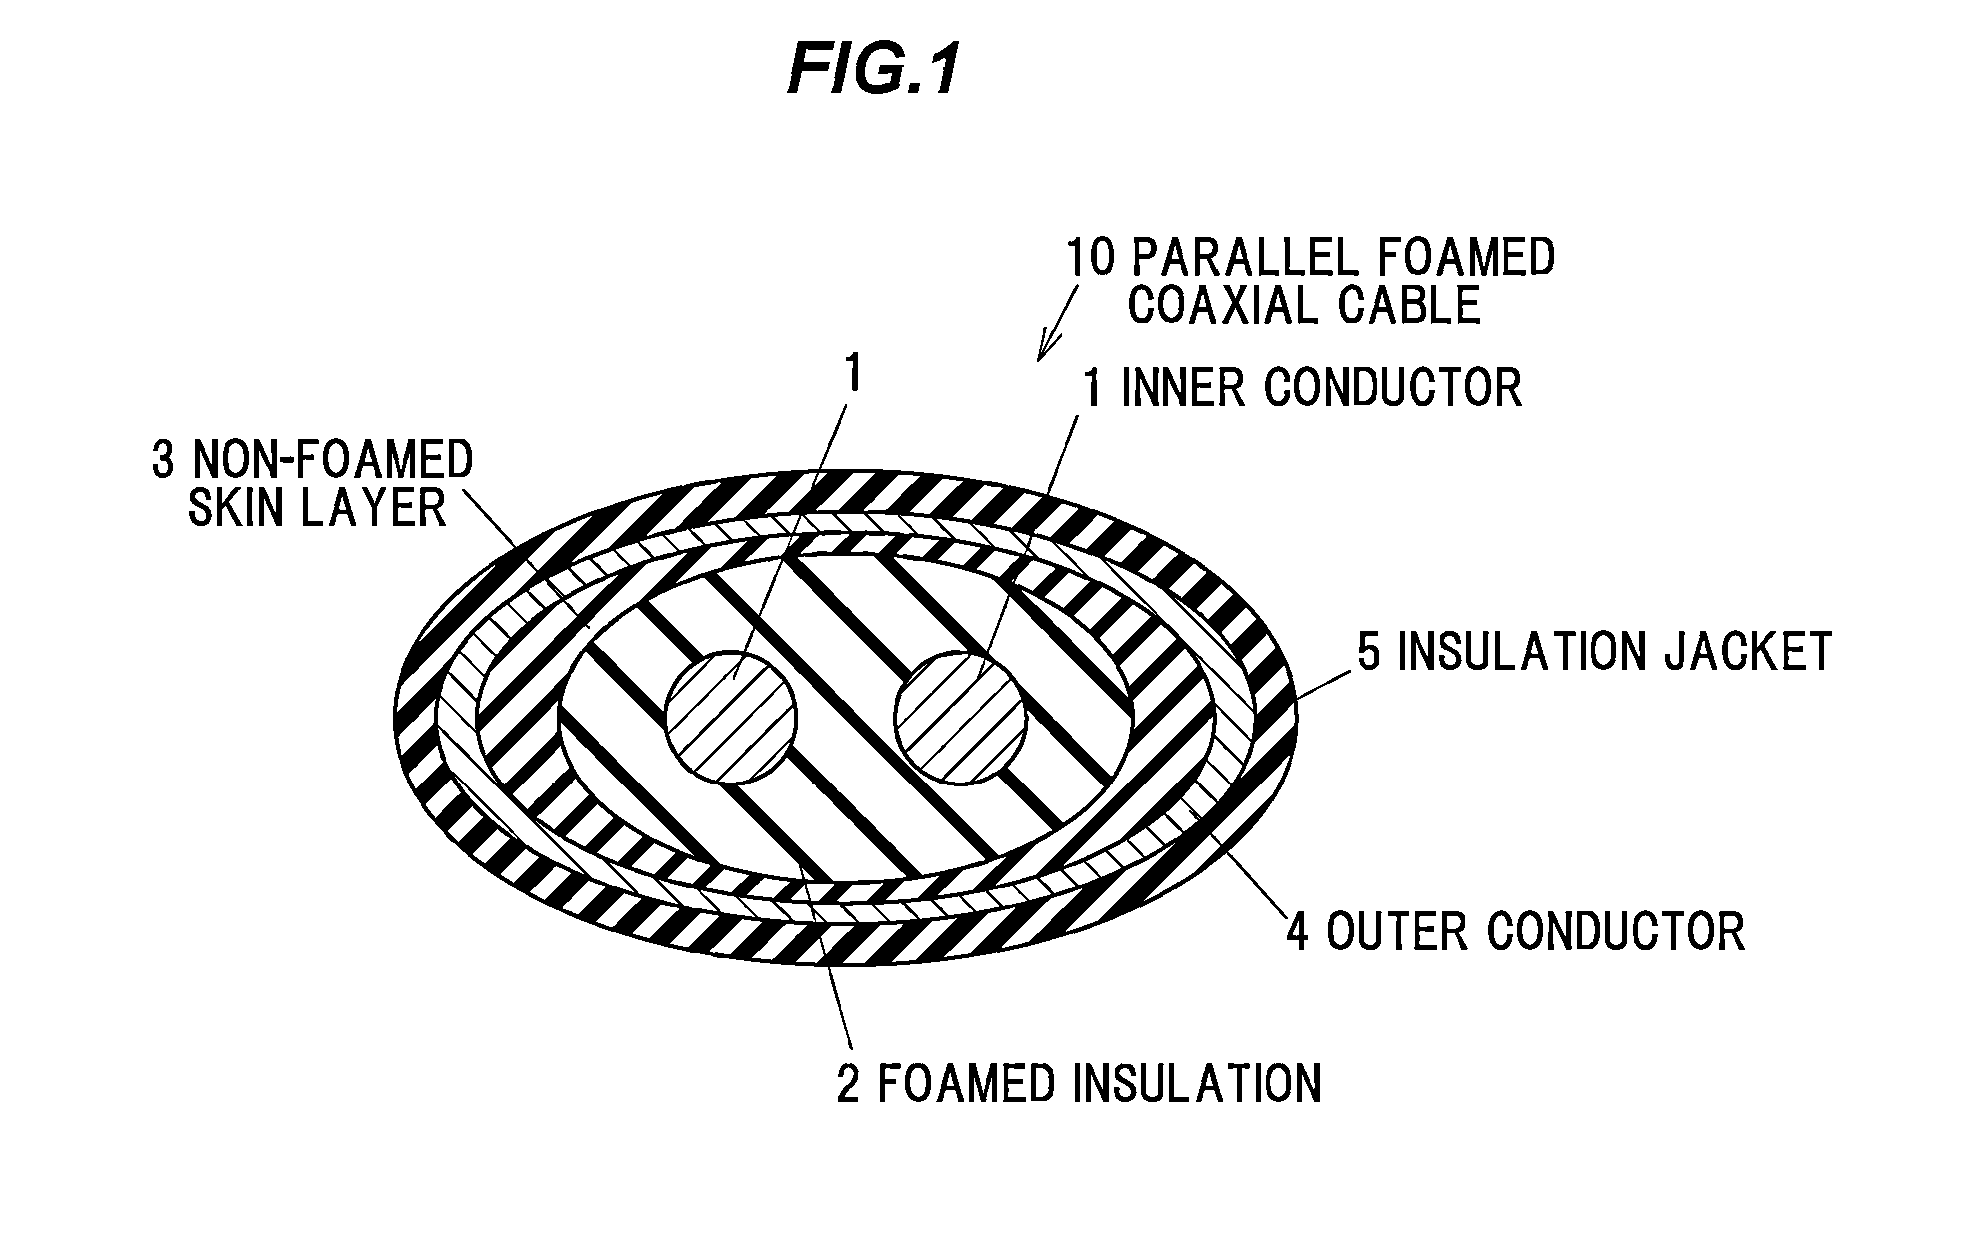 Parallel foamed coaxial cable